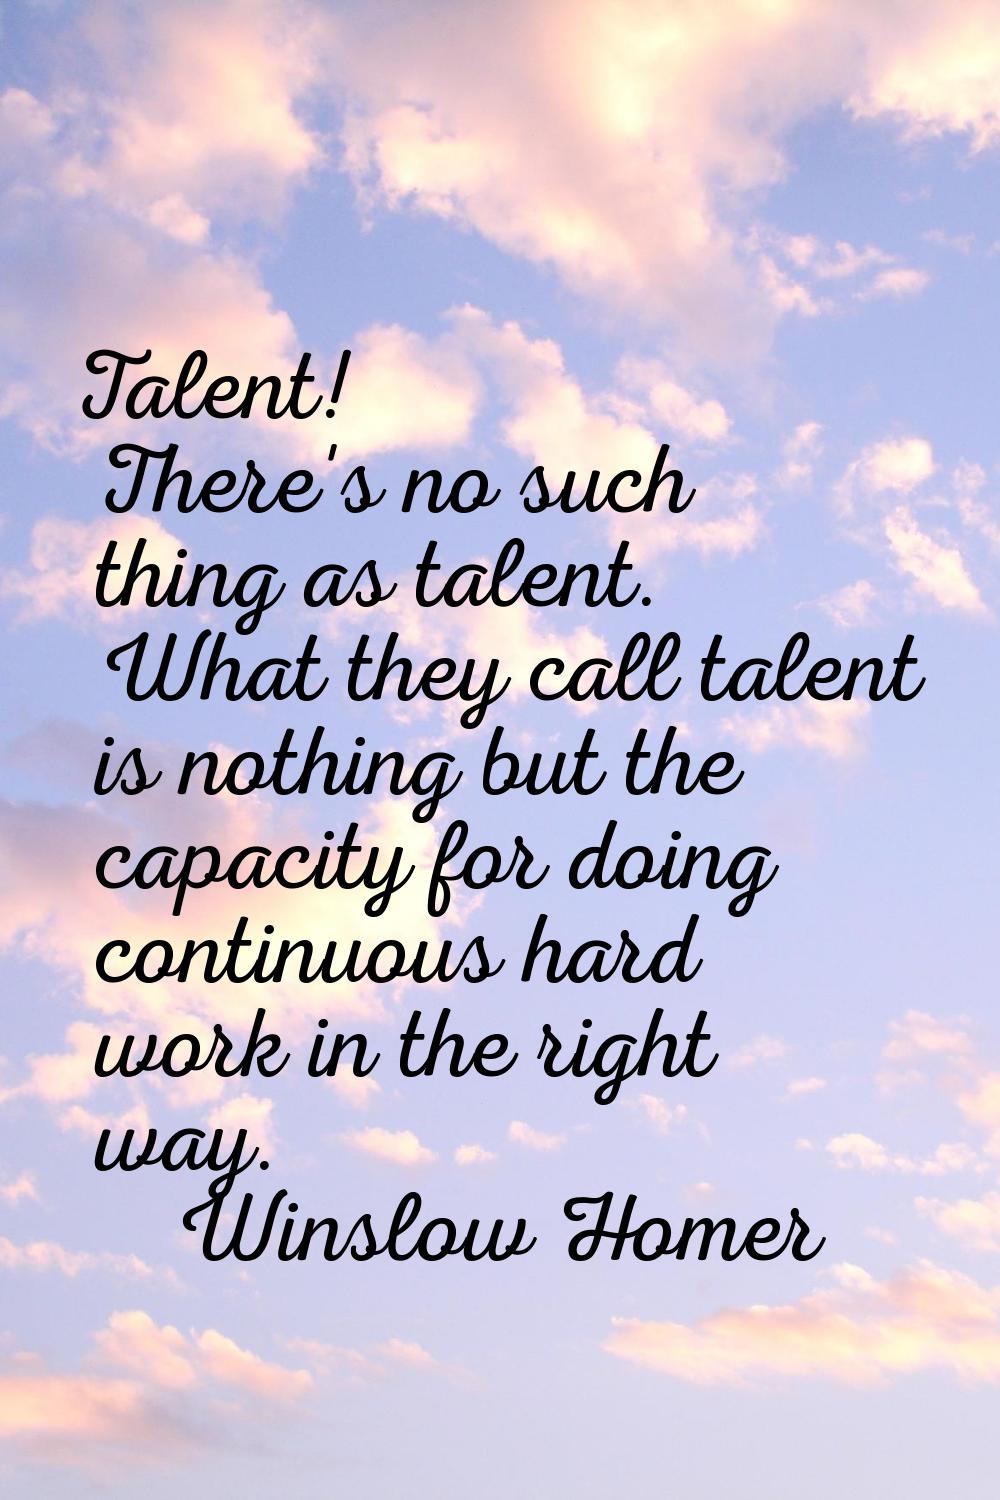 Talent! There's no such thing as talent. What they call talent is nothing but the capacity for doin